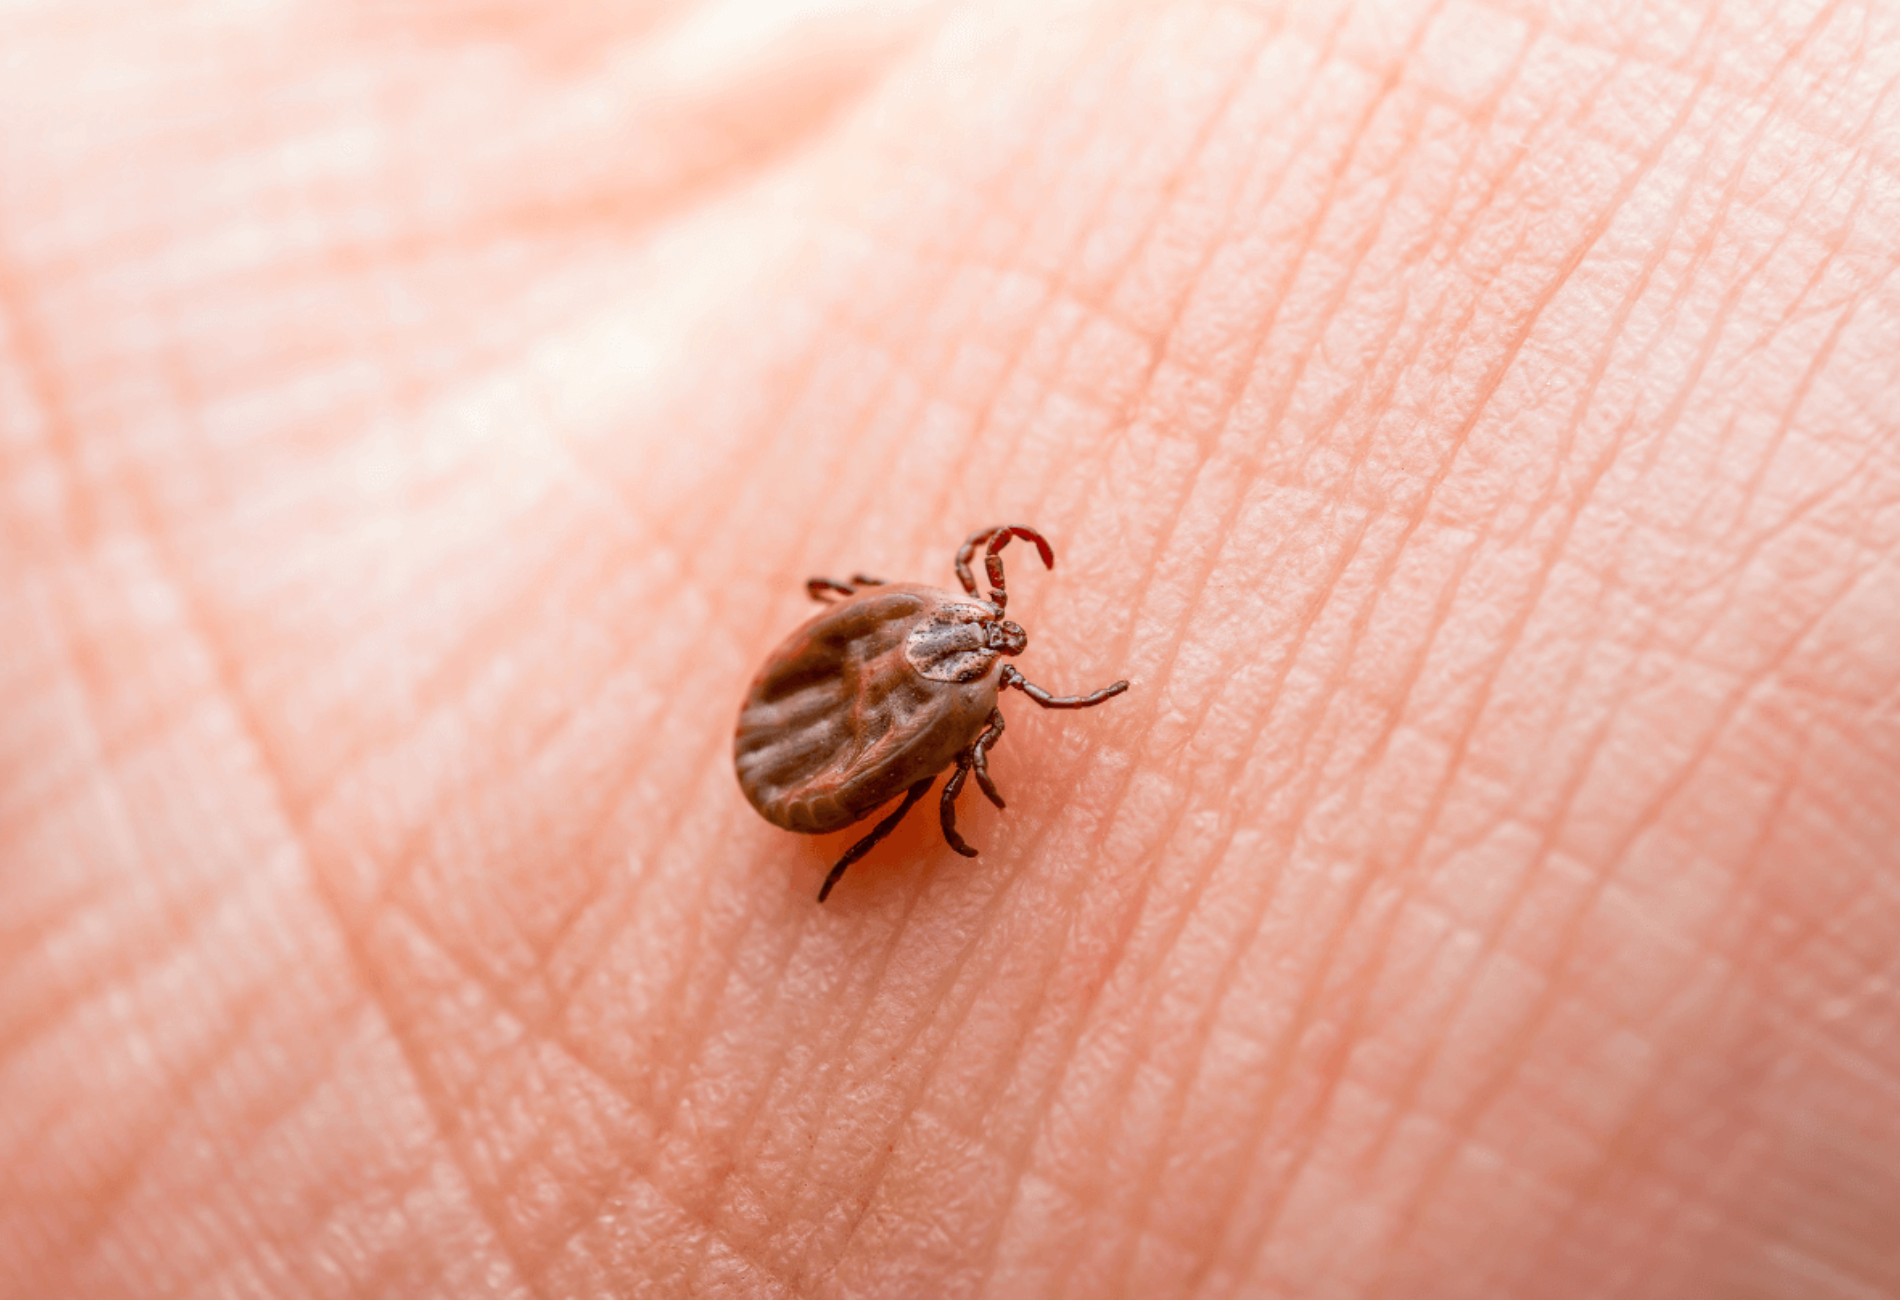 close up of a tick in the palm of someone's hand